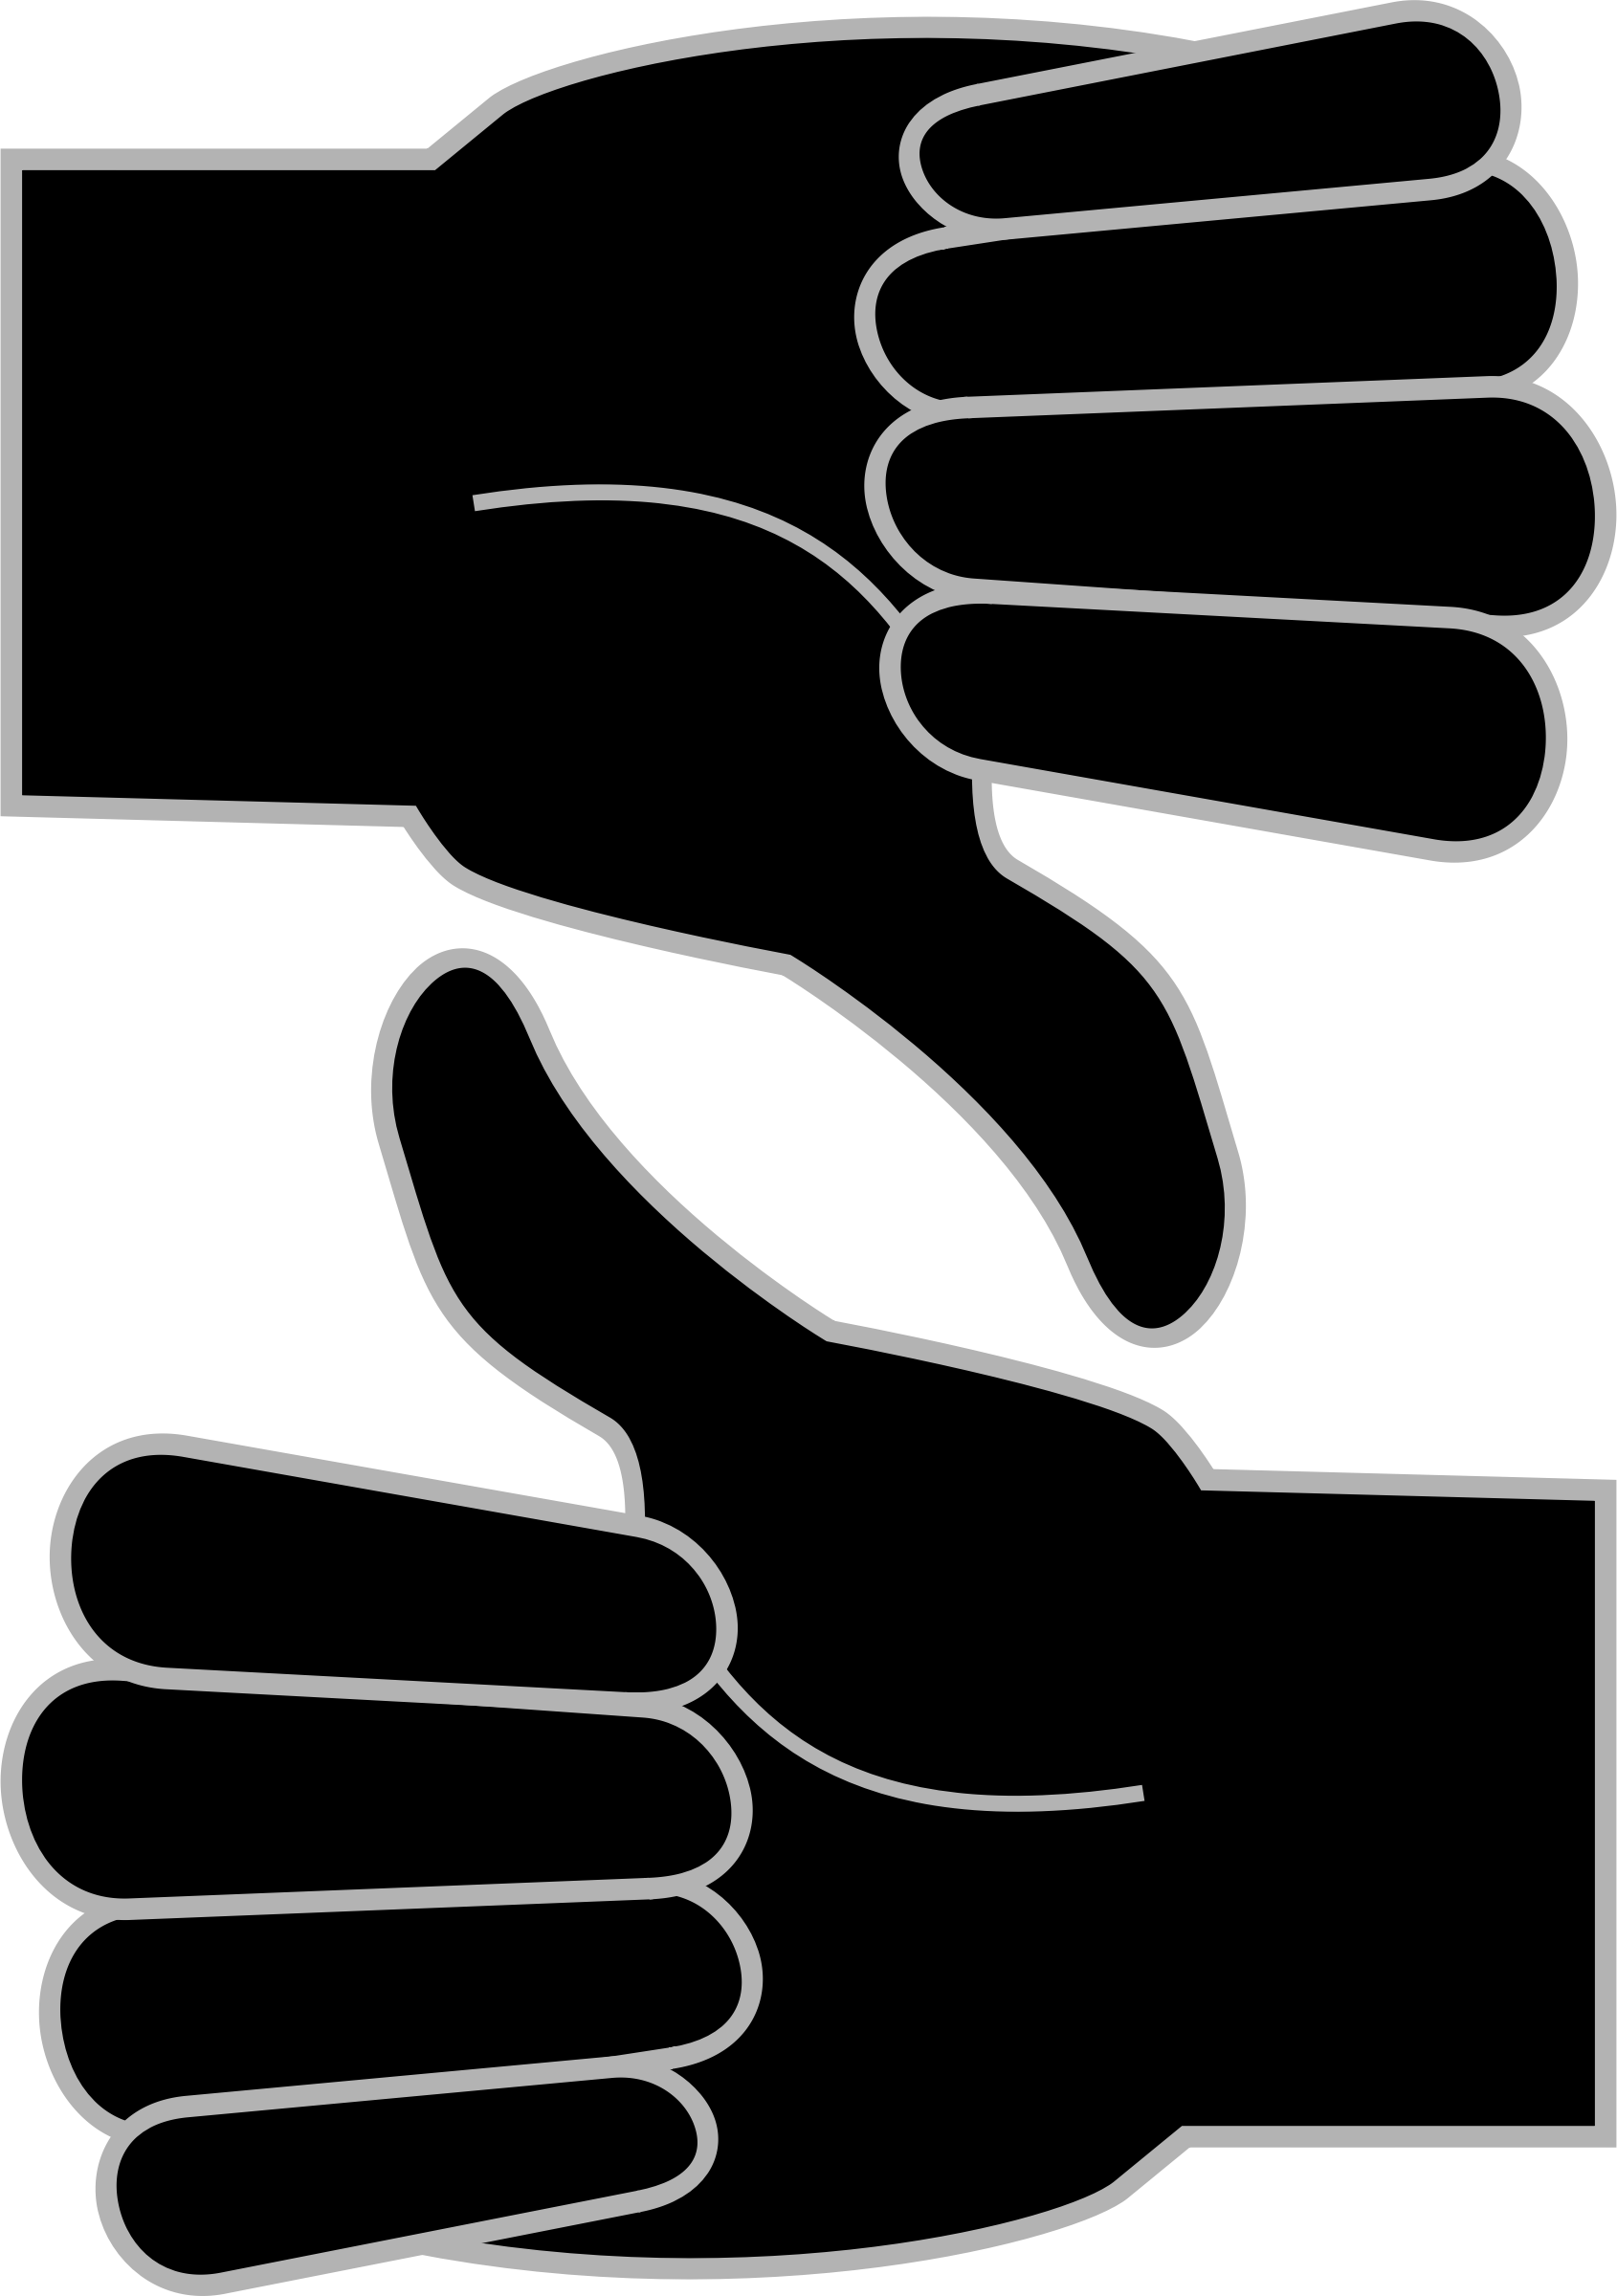 Big Image (Png) - Thumbs Up And Thumbs Down, Transparent background PNG HD thumbnail